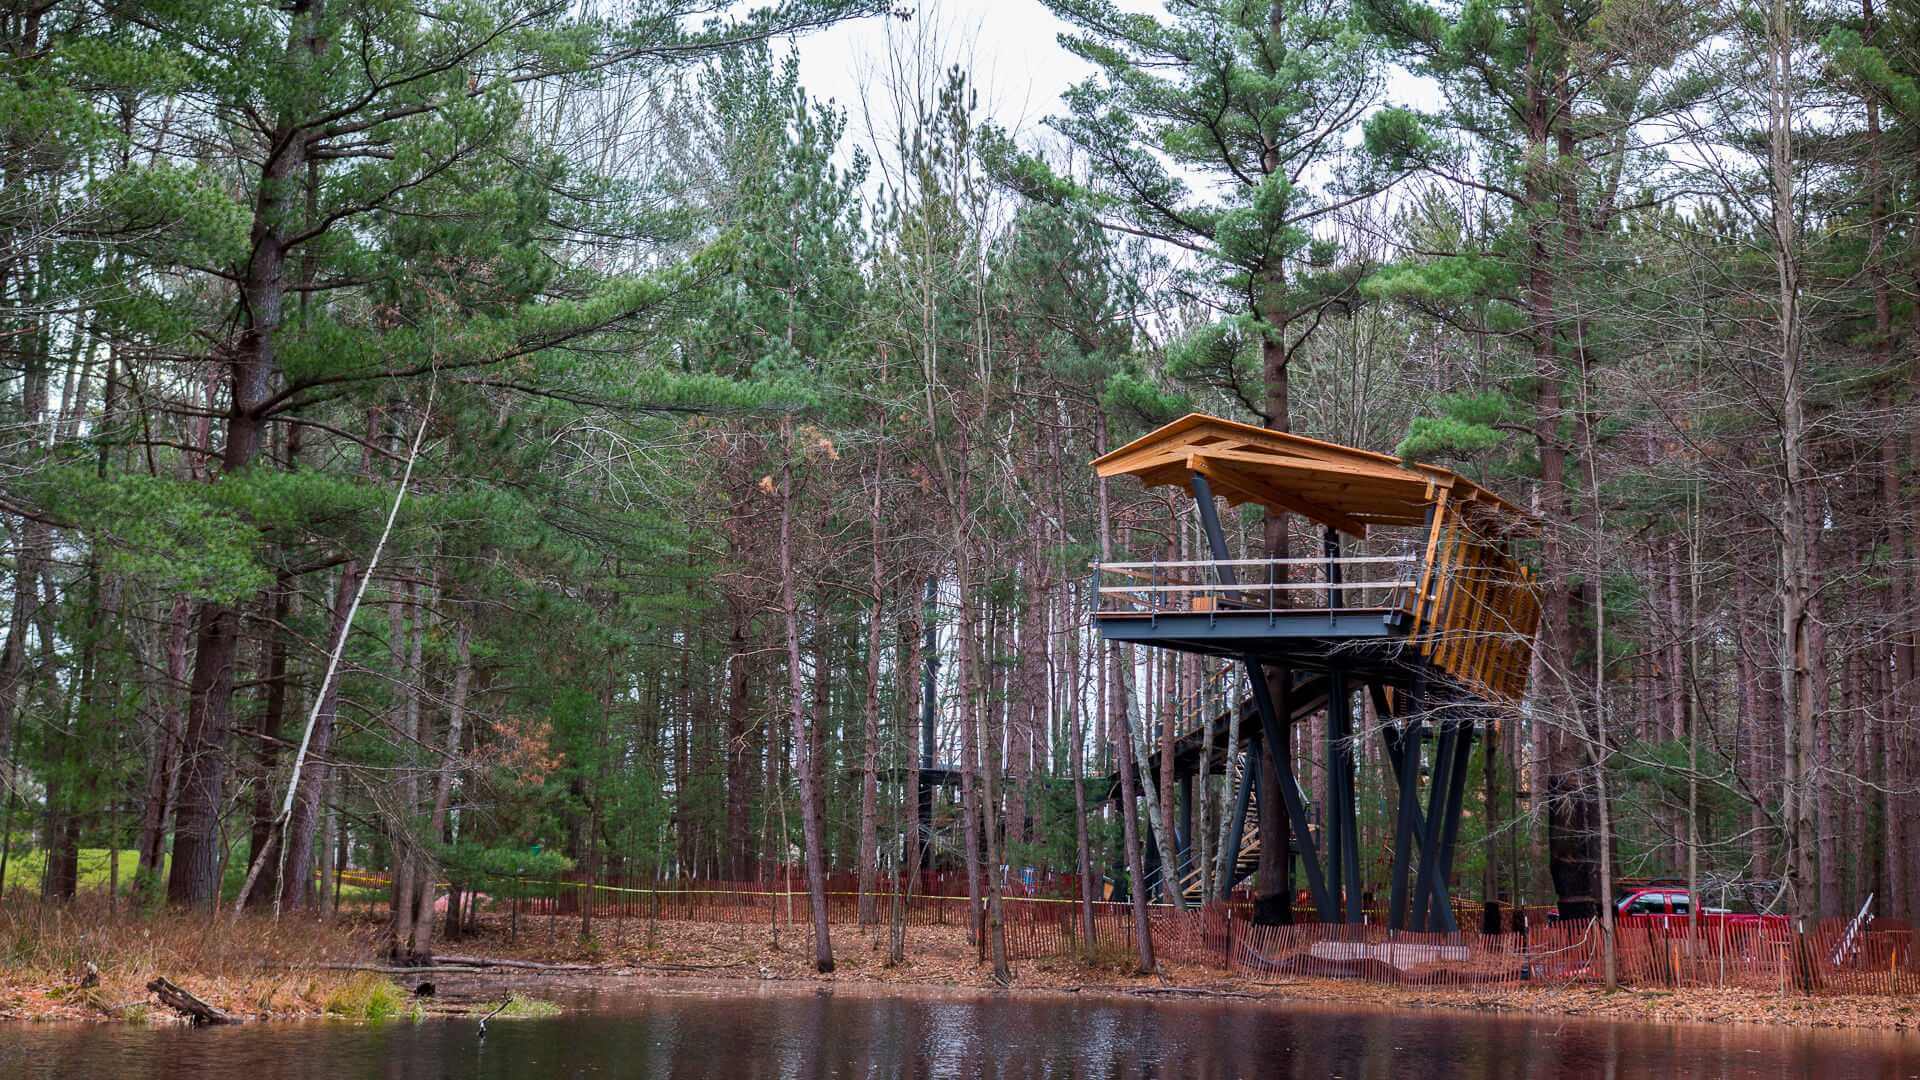 A tree house in the middle of a forest.